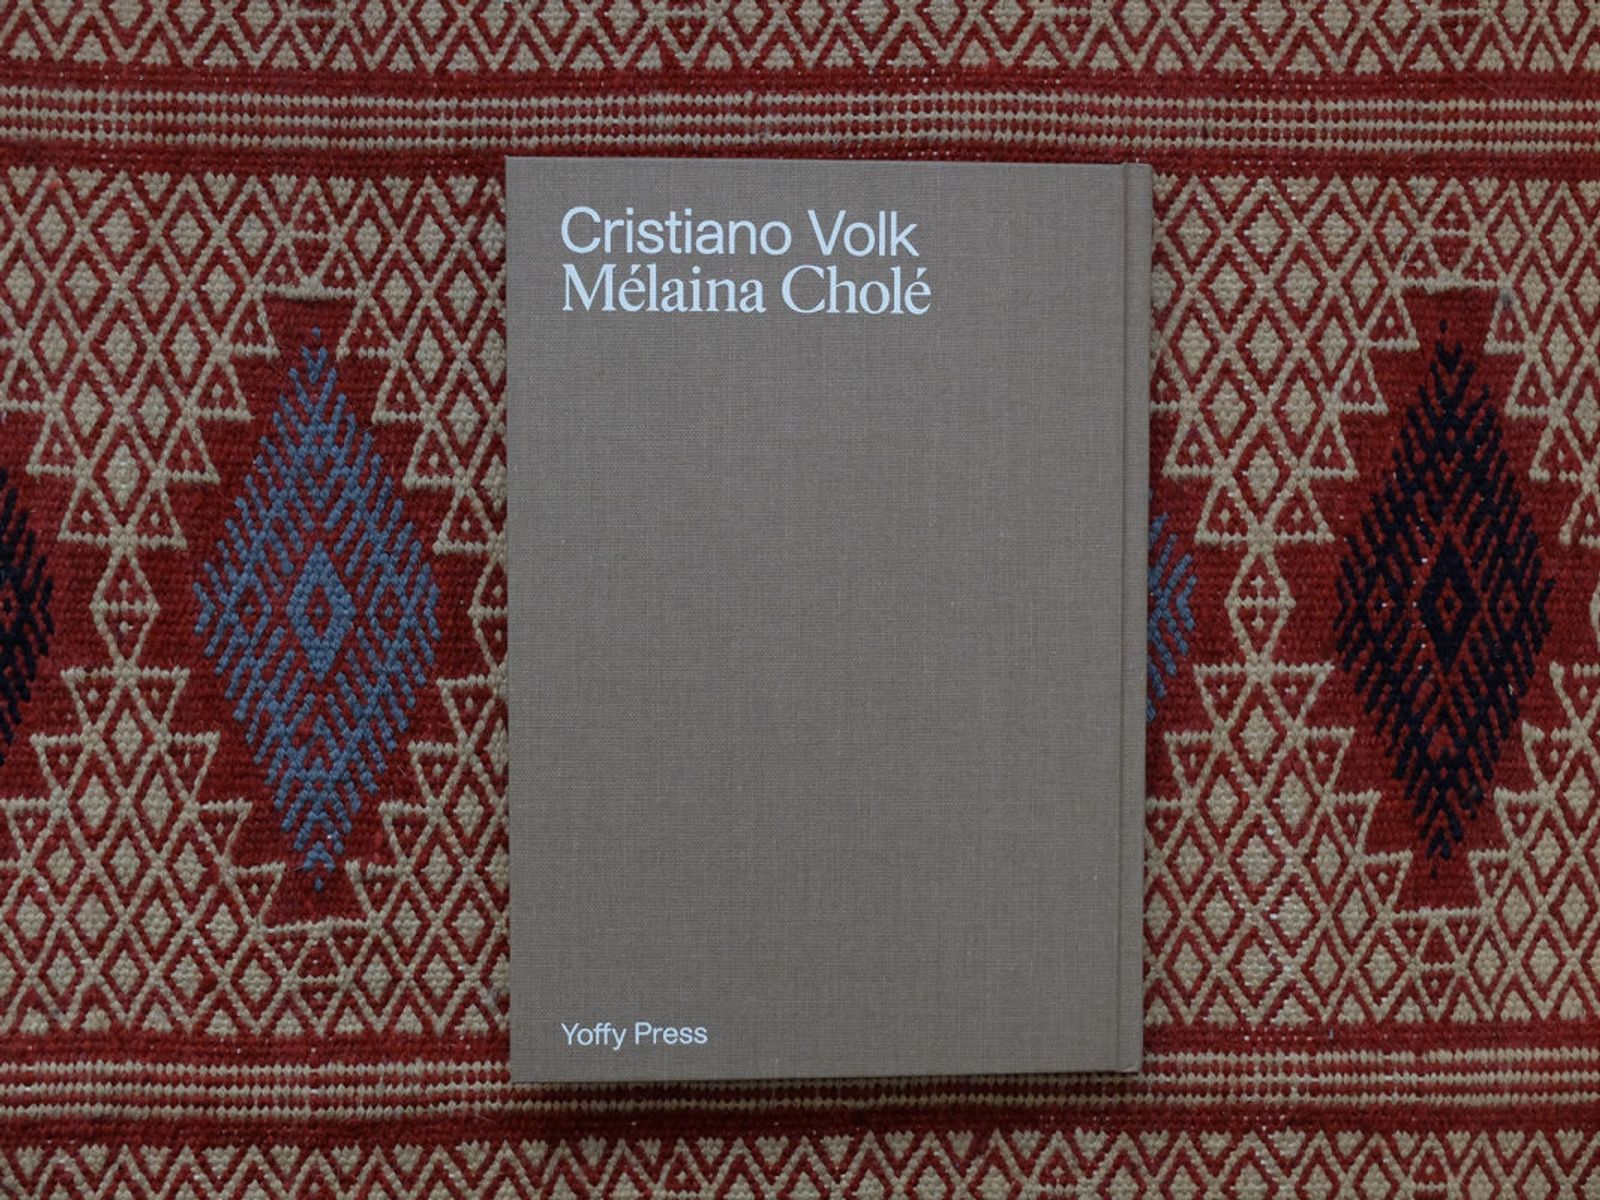 © Leporello Books - Image from the MÉLAINA CHOLÉ by Cristiano Volk photography project